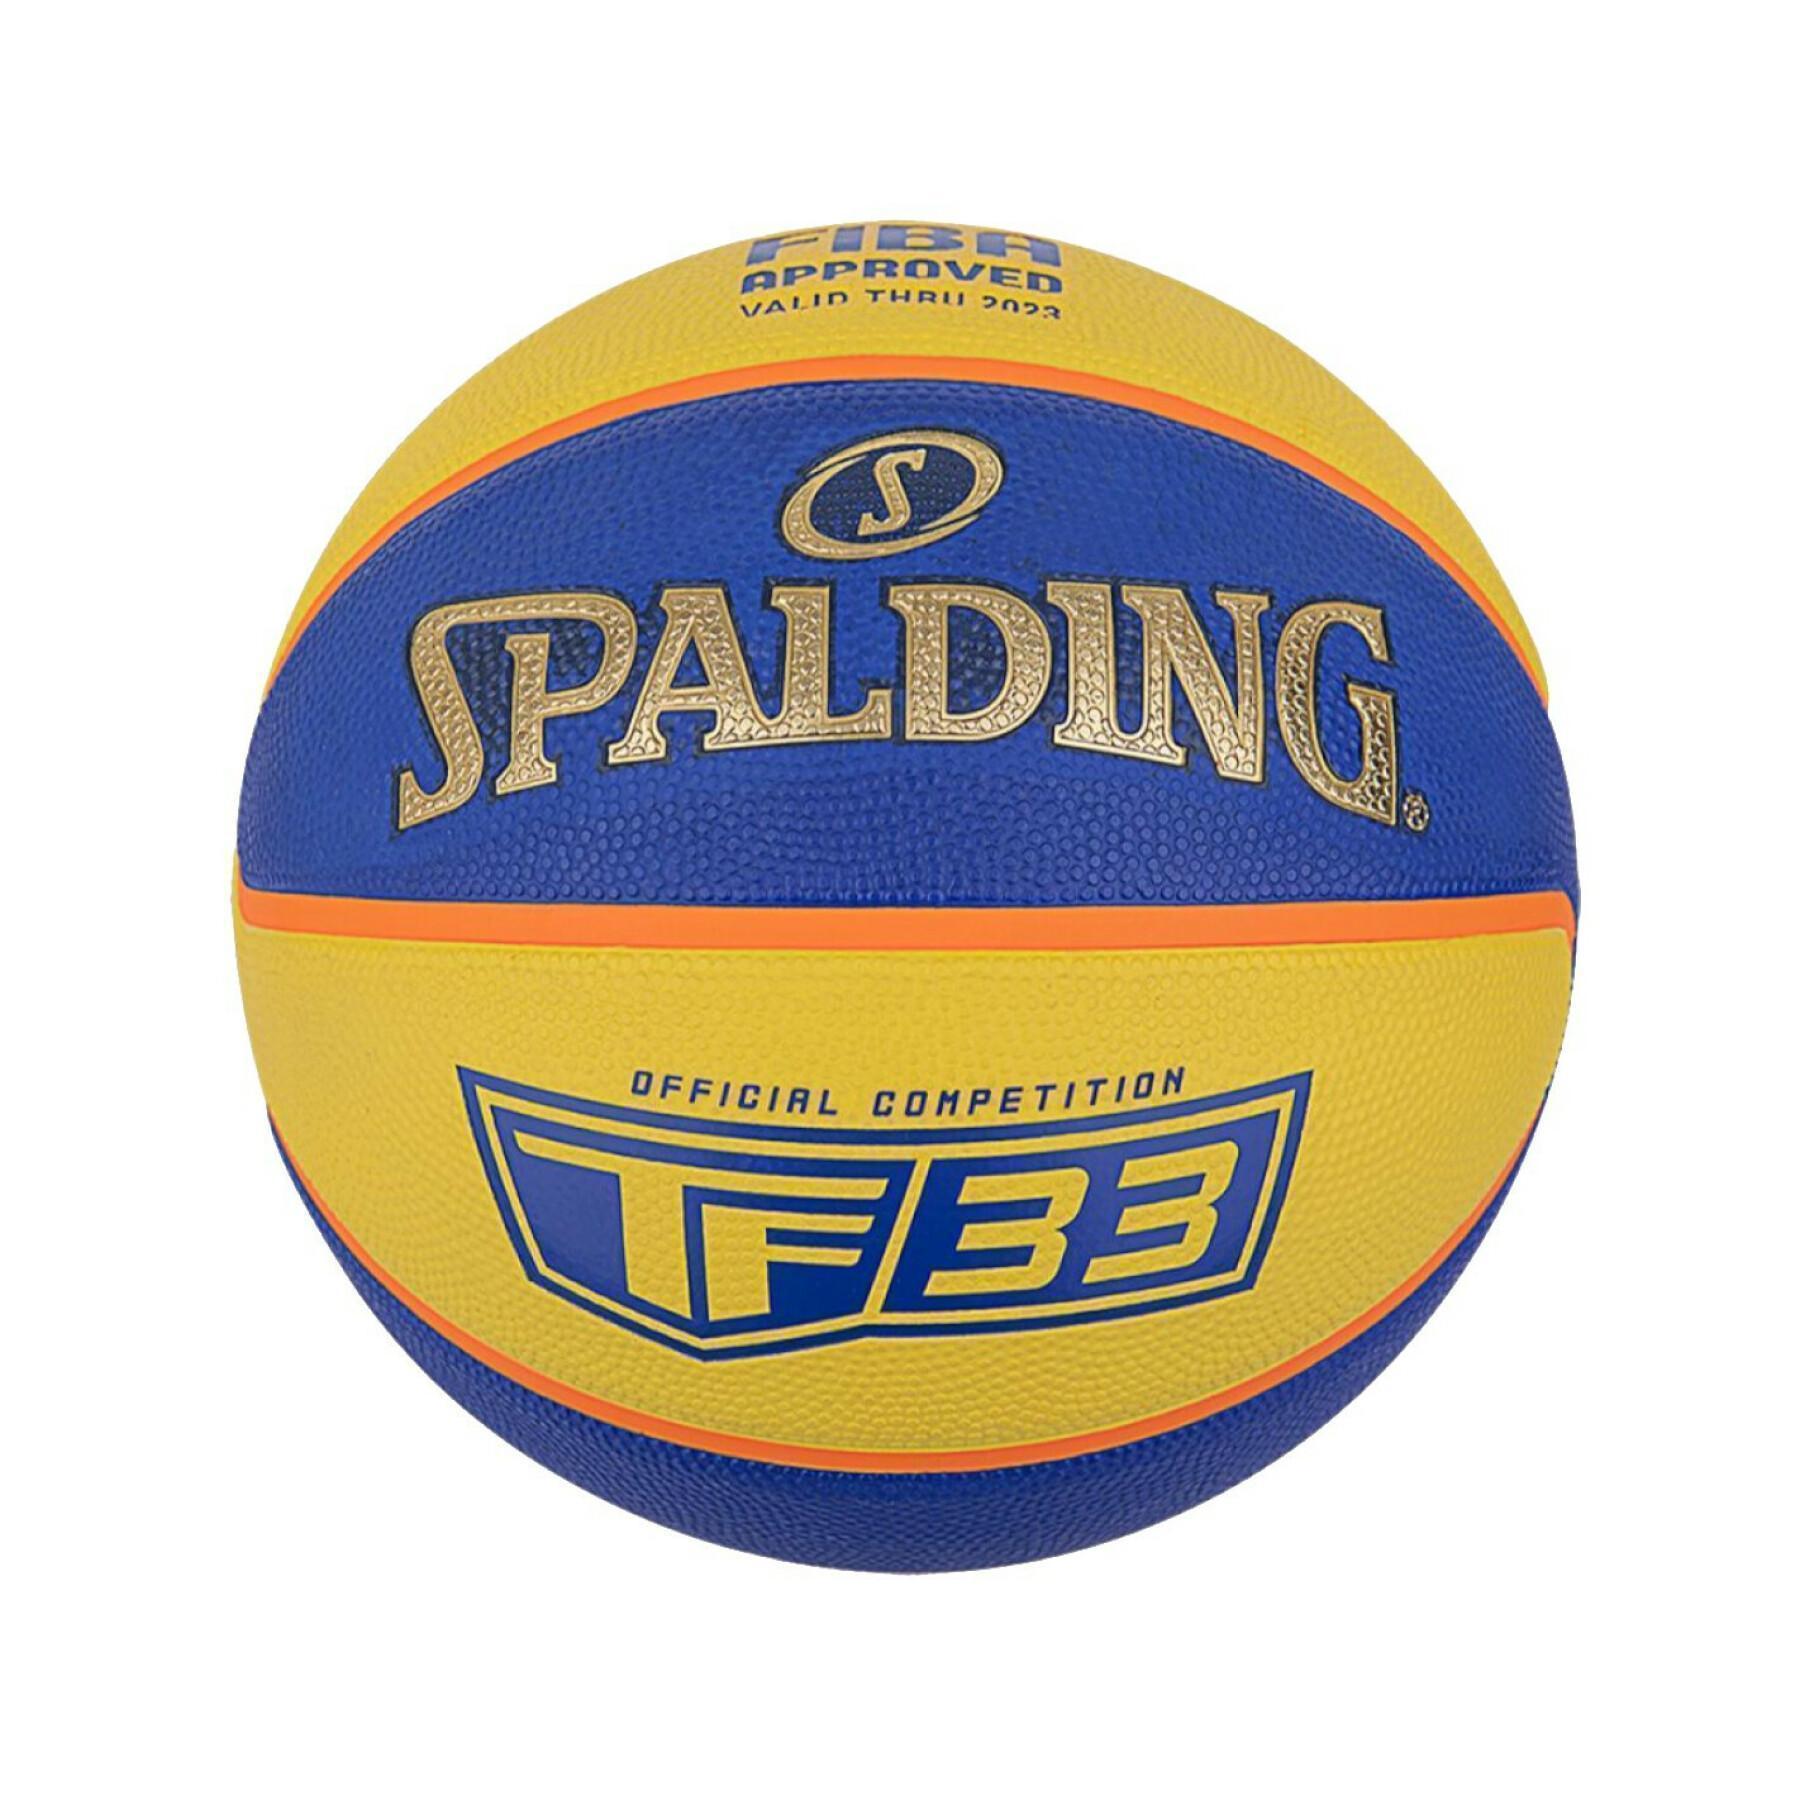 Pallone Spalding TF-33 Gold Rubber